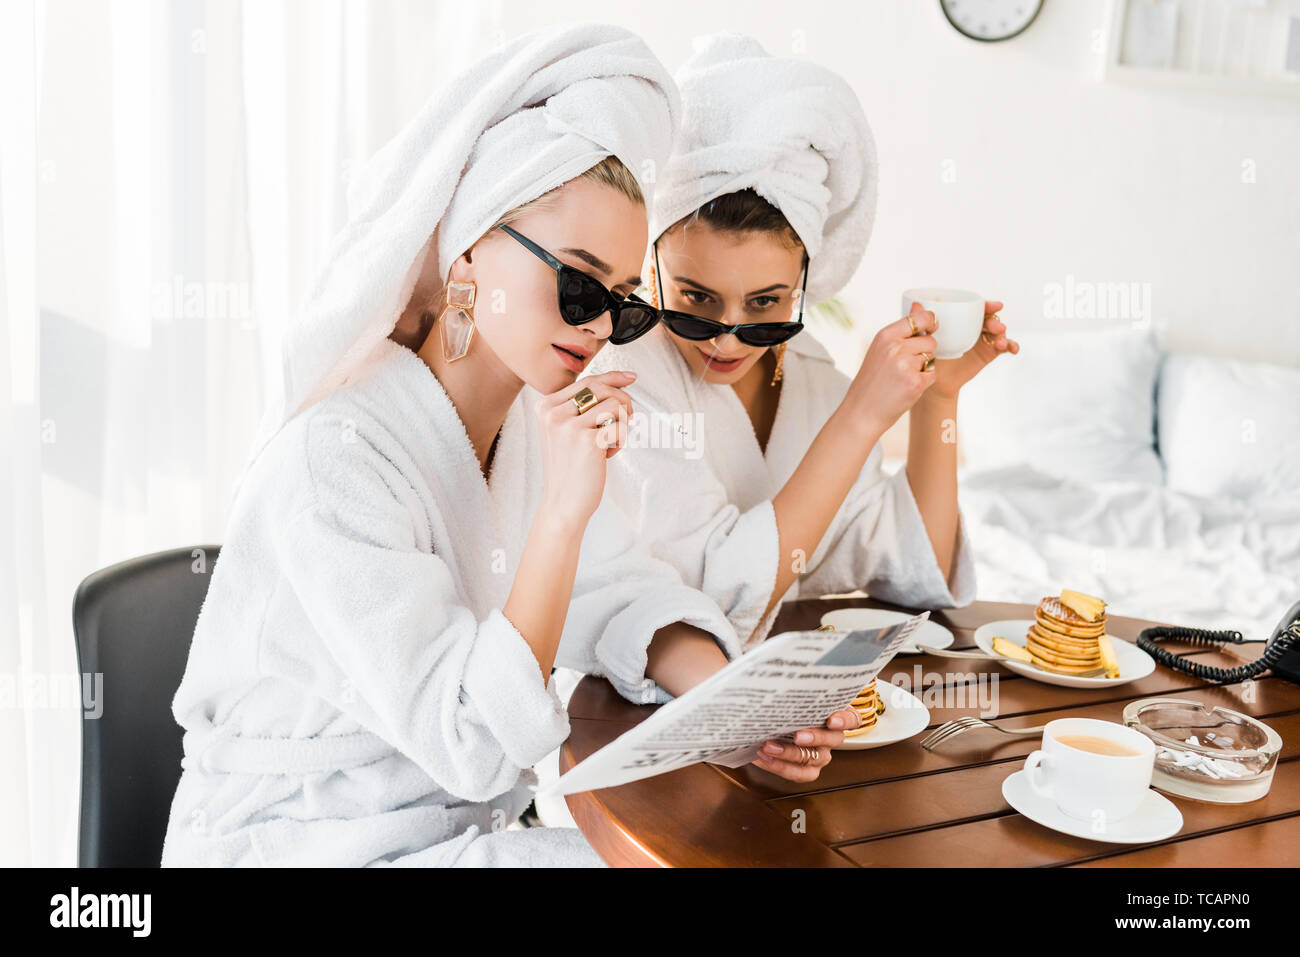 stylish women in bathrobes, sunglasses and jewelry with towels on heads smoking and reading newspaper while having breakfast Stock Photo